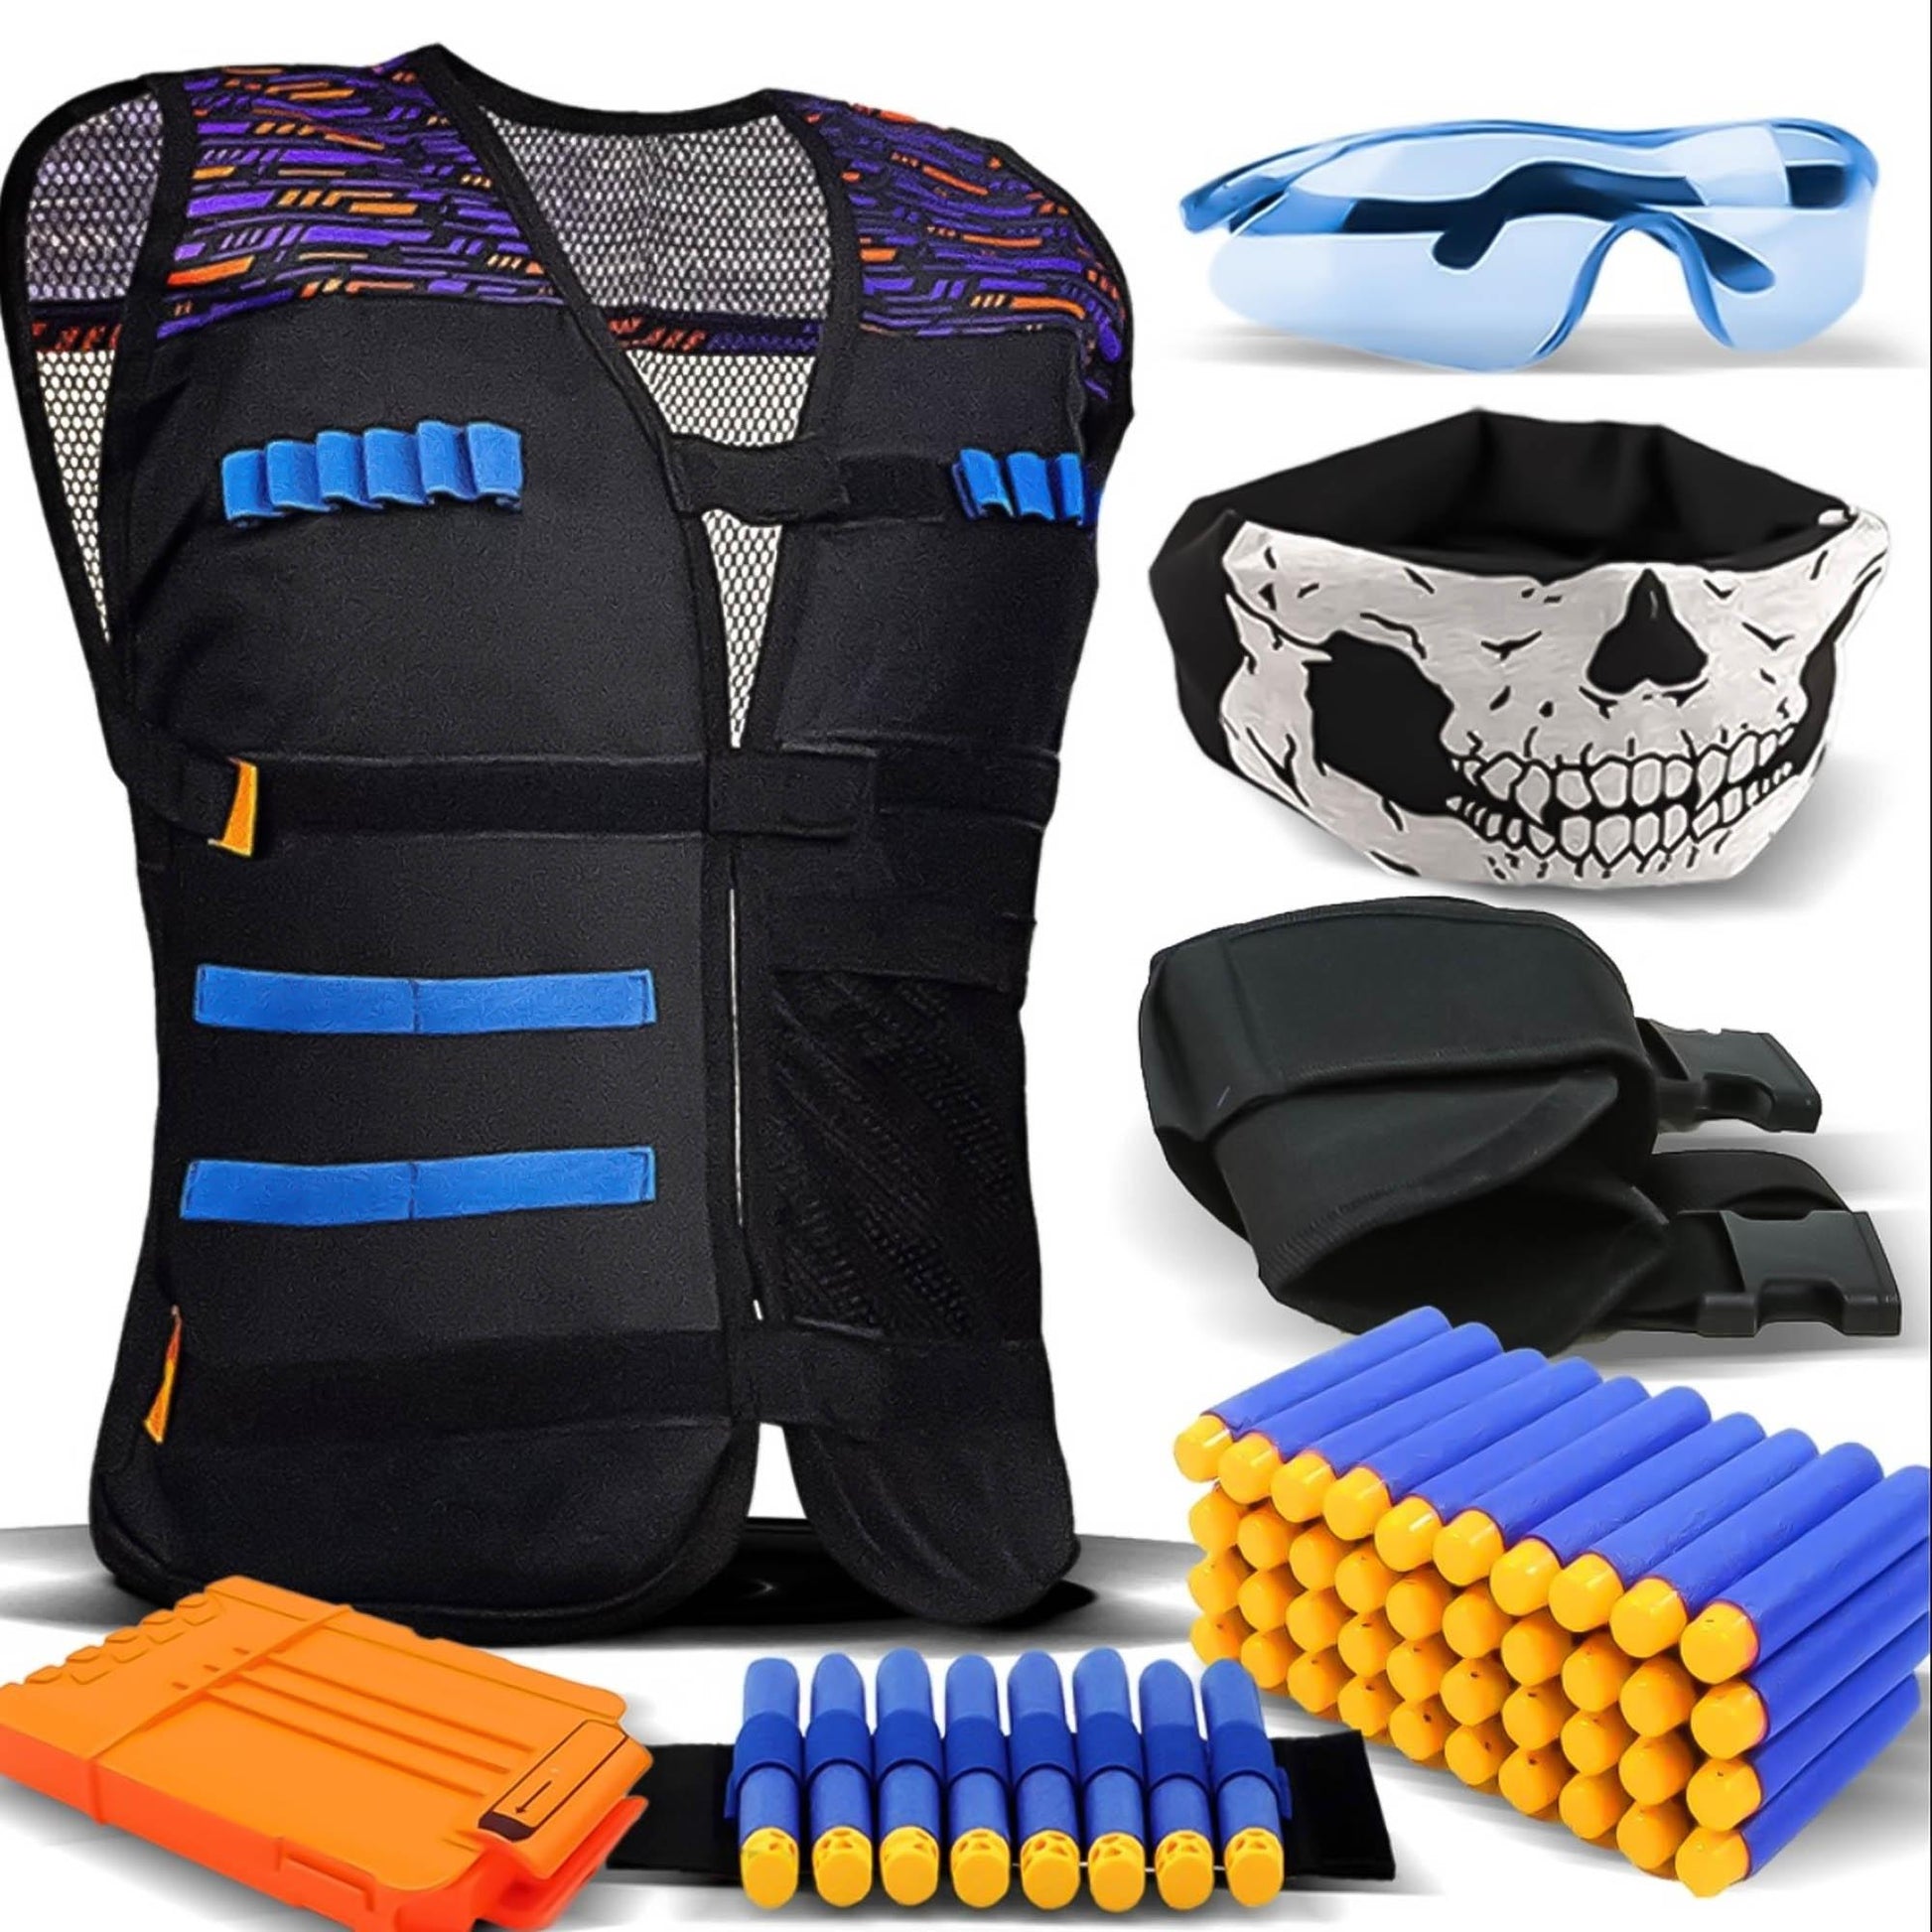 Nerf vision gear Colombia